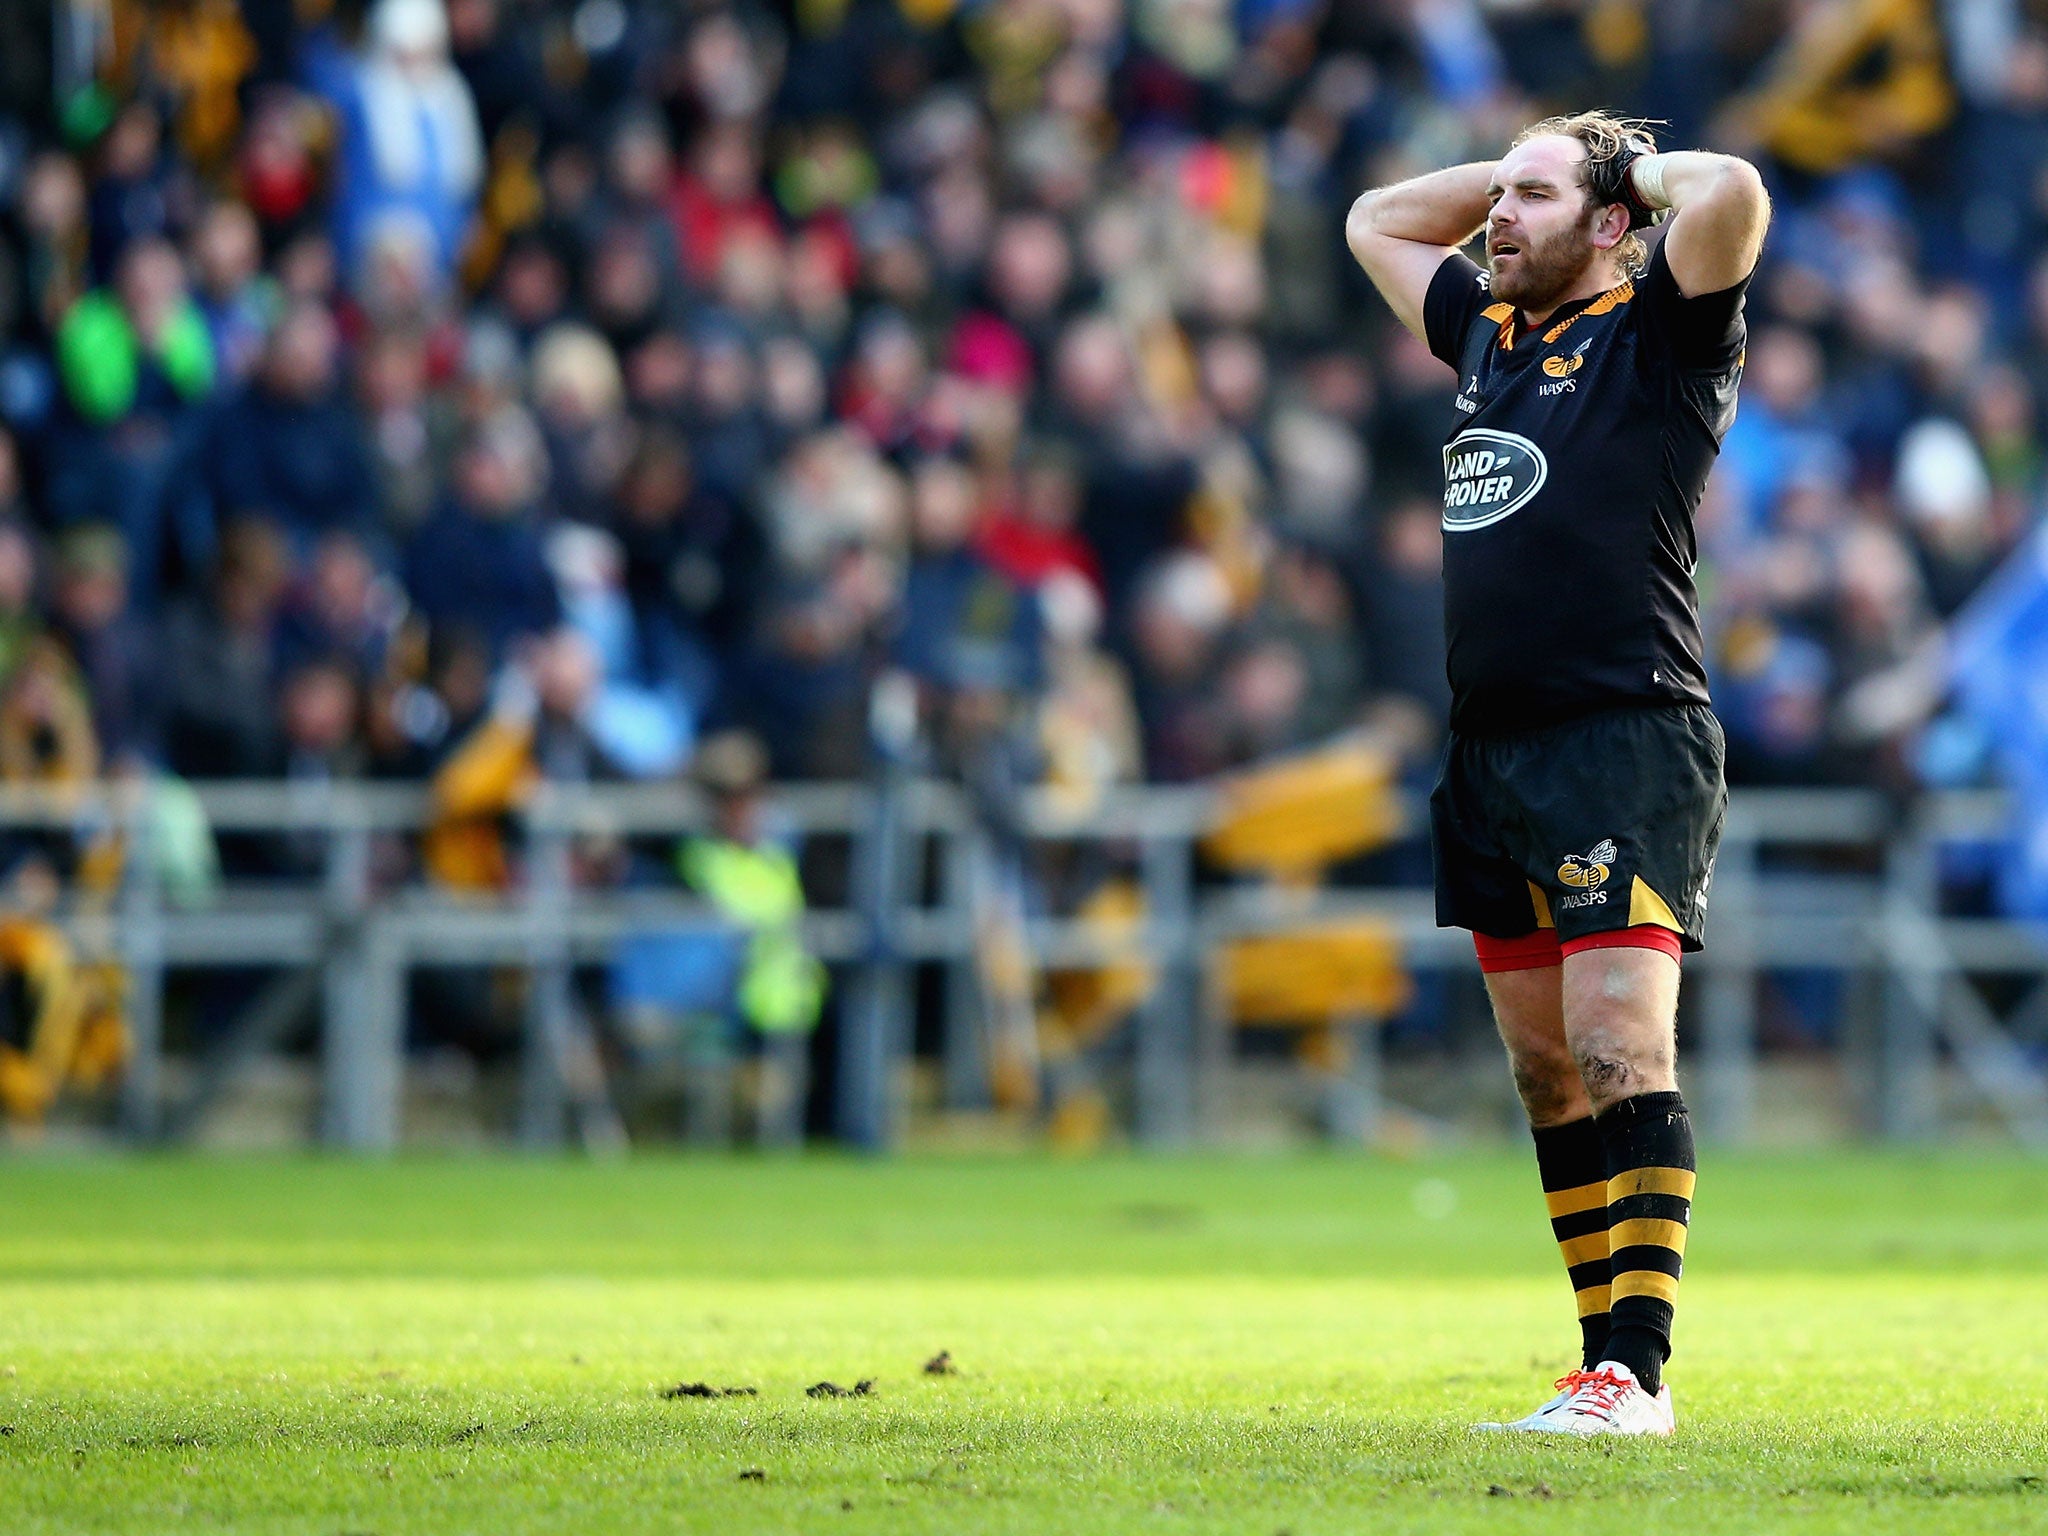 Andy Goode reacts to his missed drop goal in the final play of the 20-20 draw between Wasps and Leinster